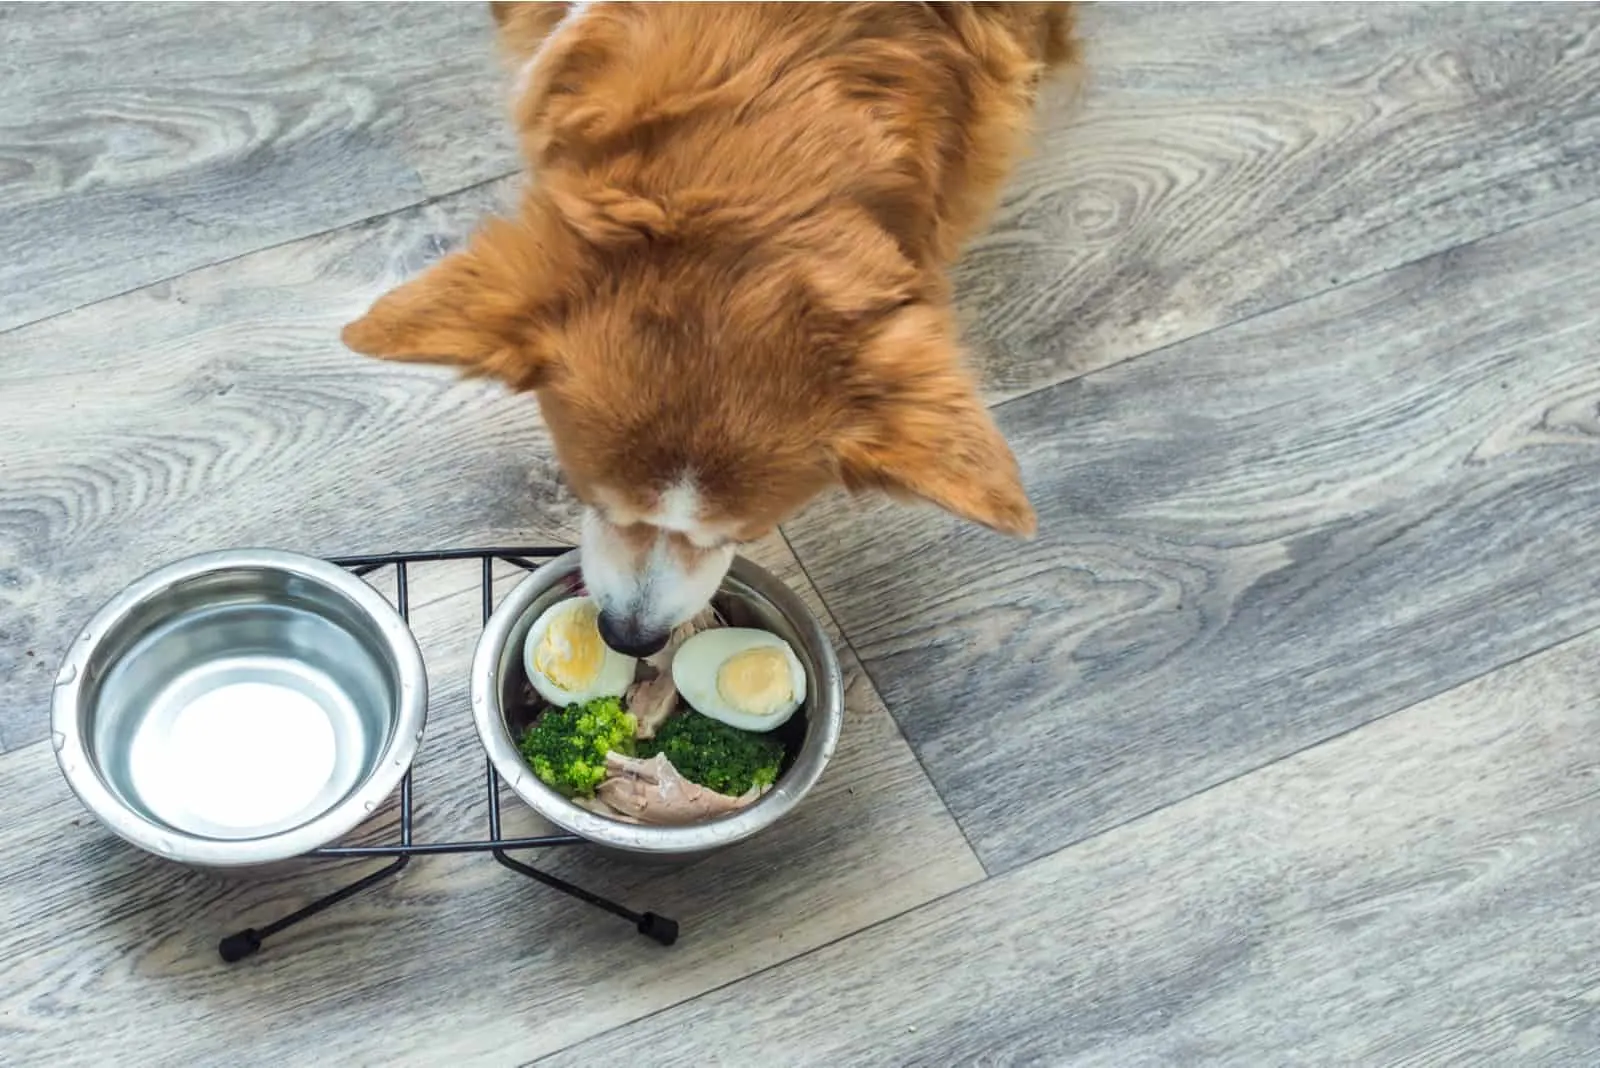 dog in the kitchen on the floor eats fresh natural food from a bowl